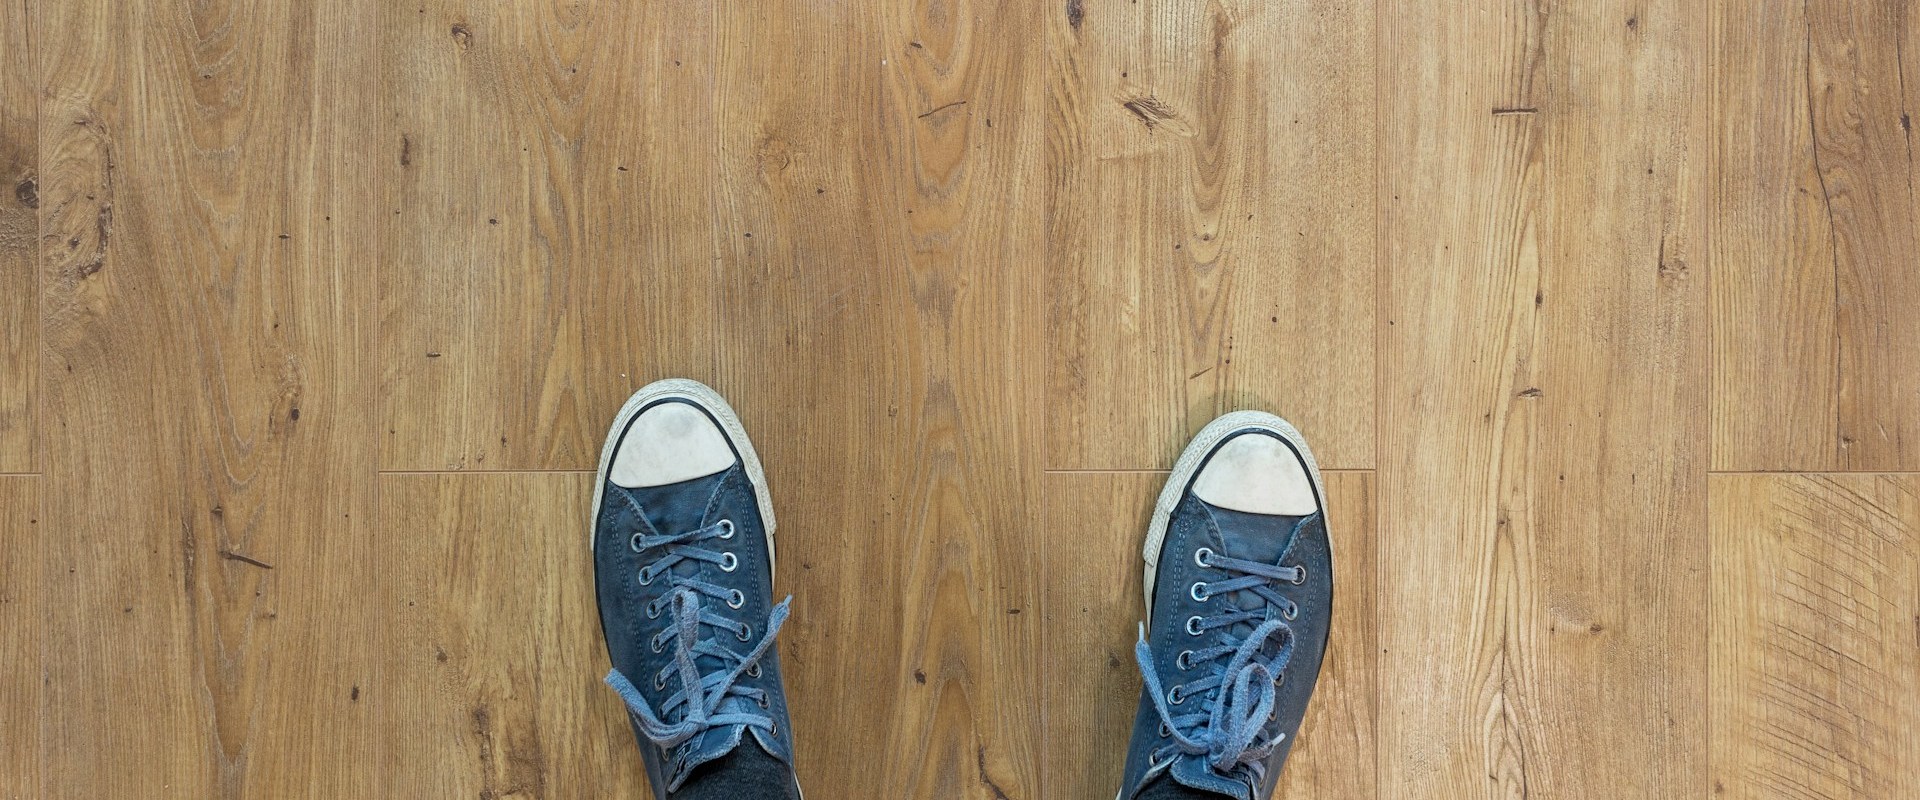 Crafting Cohesion: Selecting Wooden Floors To Accentuate Hardwood Flooring In Dublin